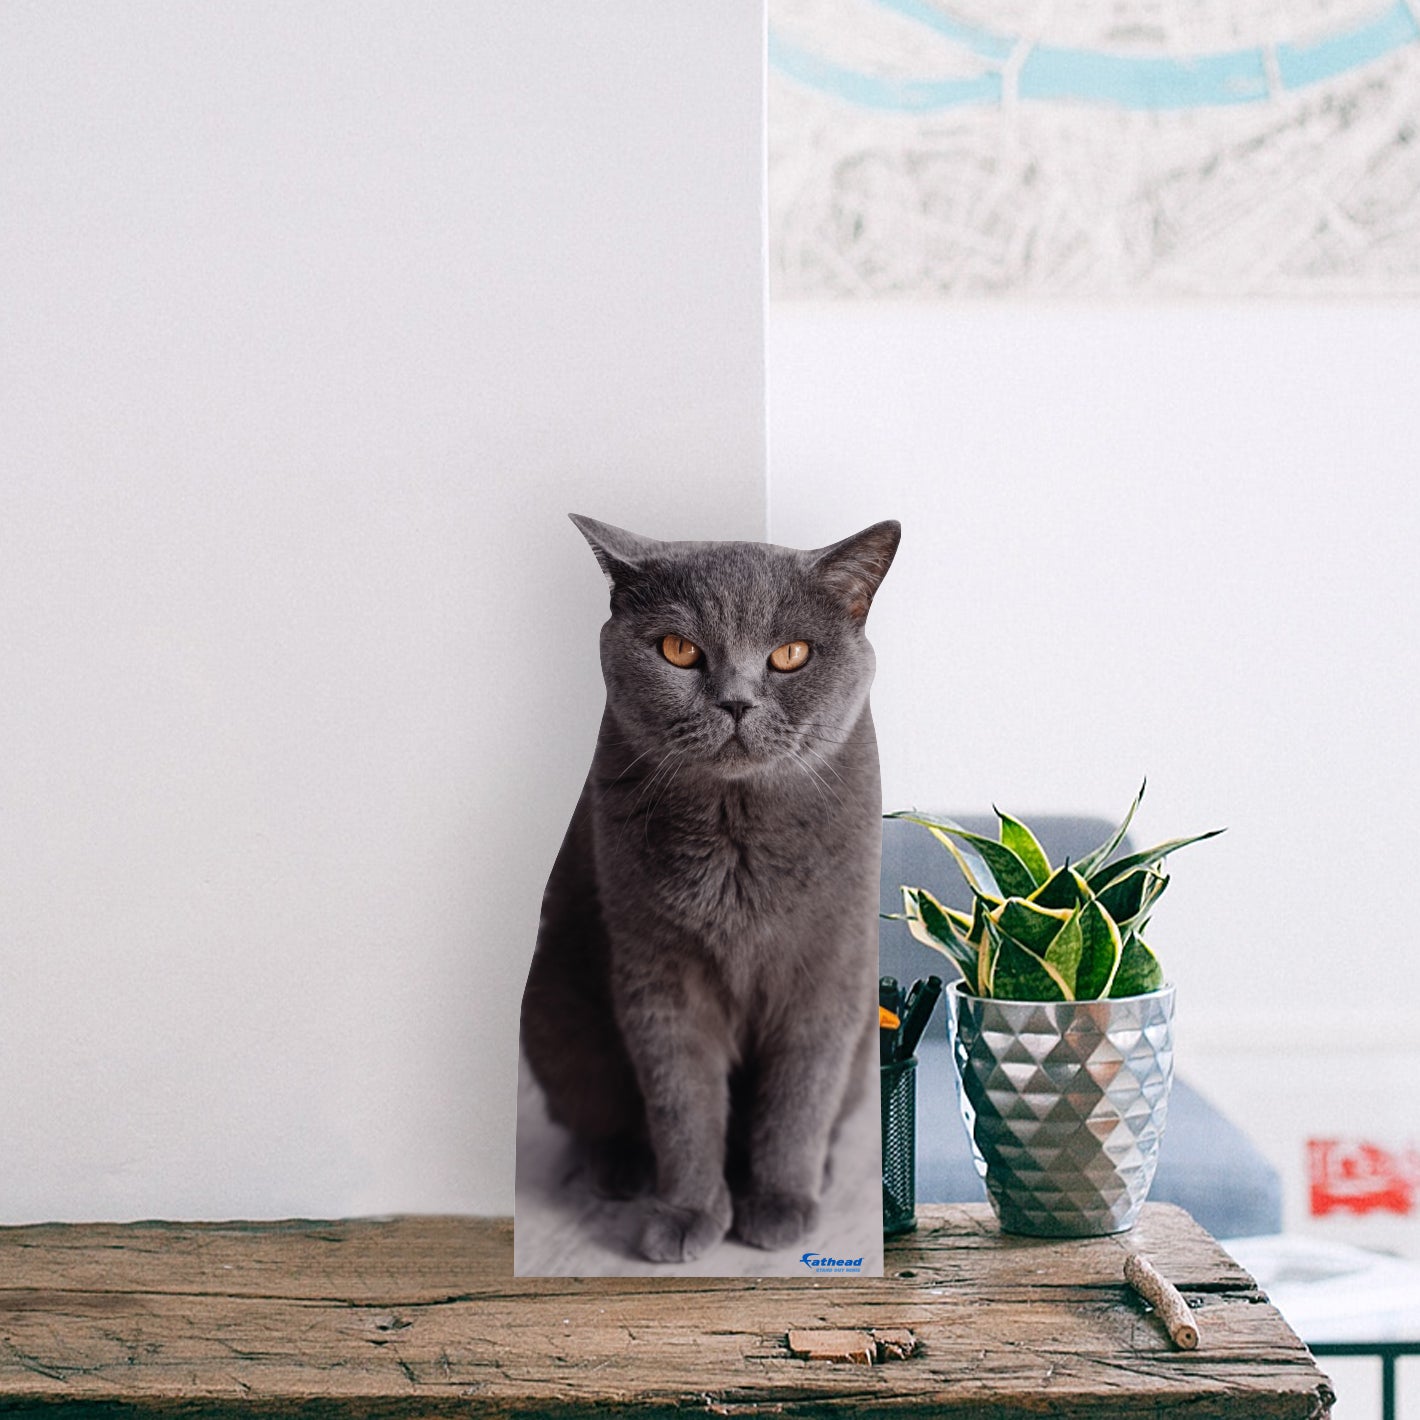 Cat Who Invented Bebop, The – The Creative Company Shop